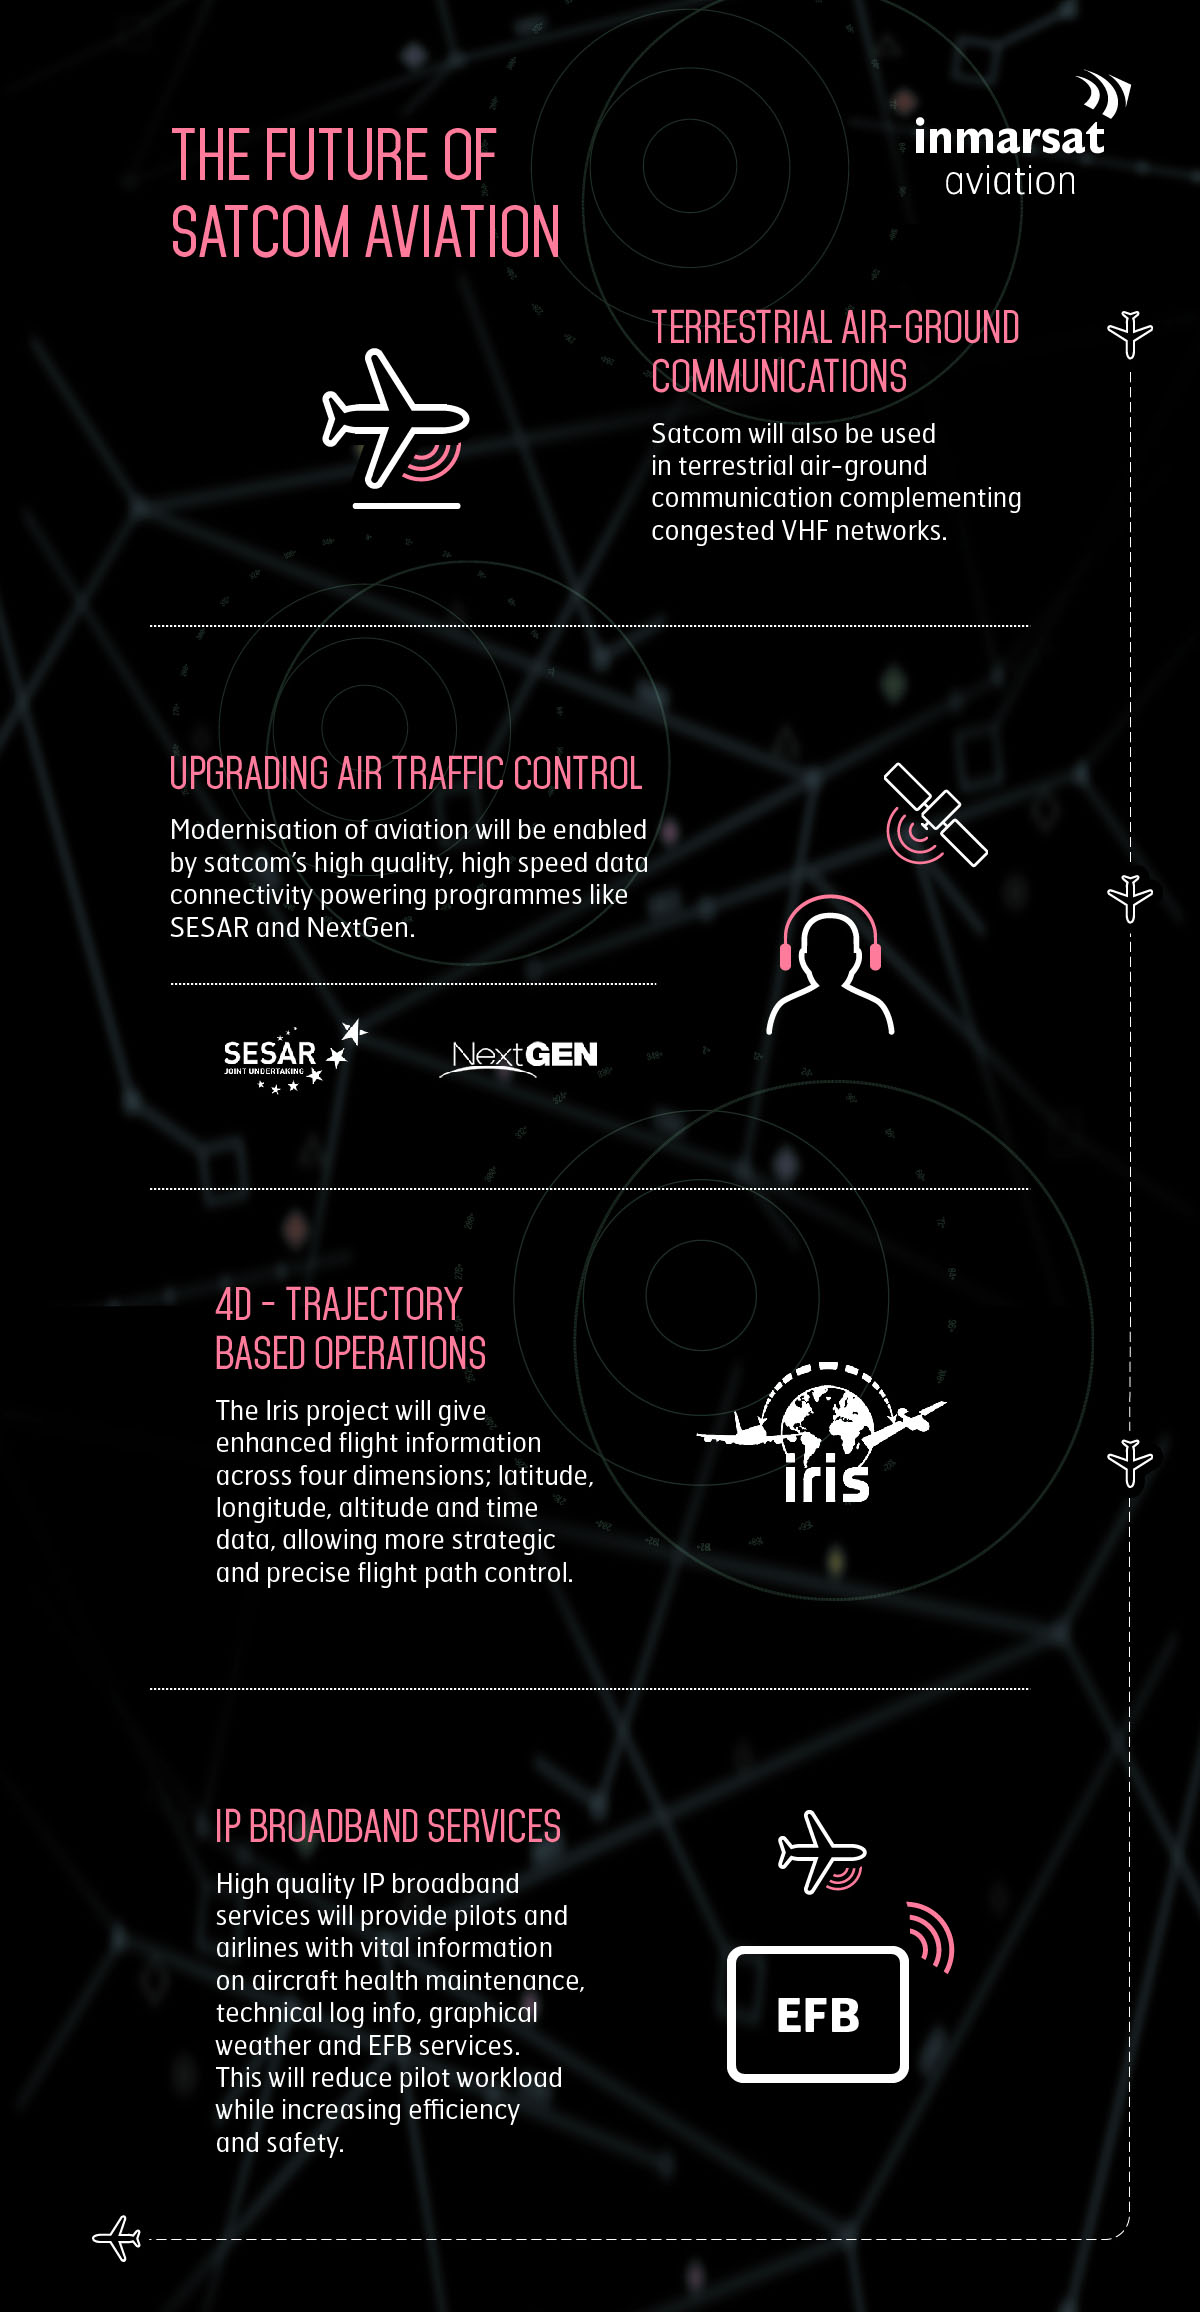 Infographic on the future of satcom and aviation safety and operations 